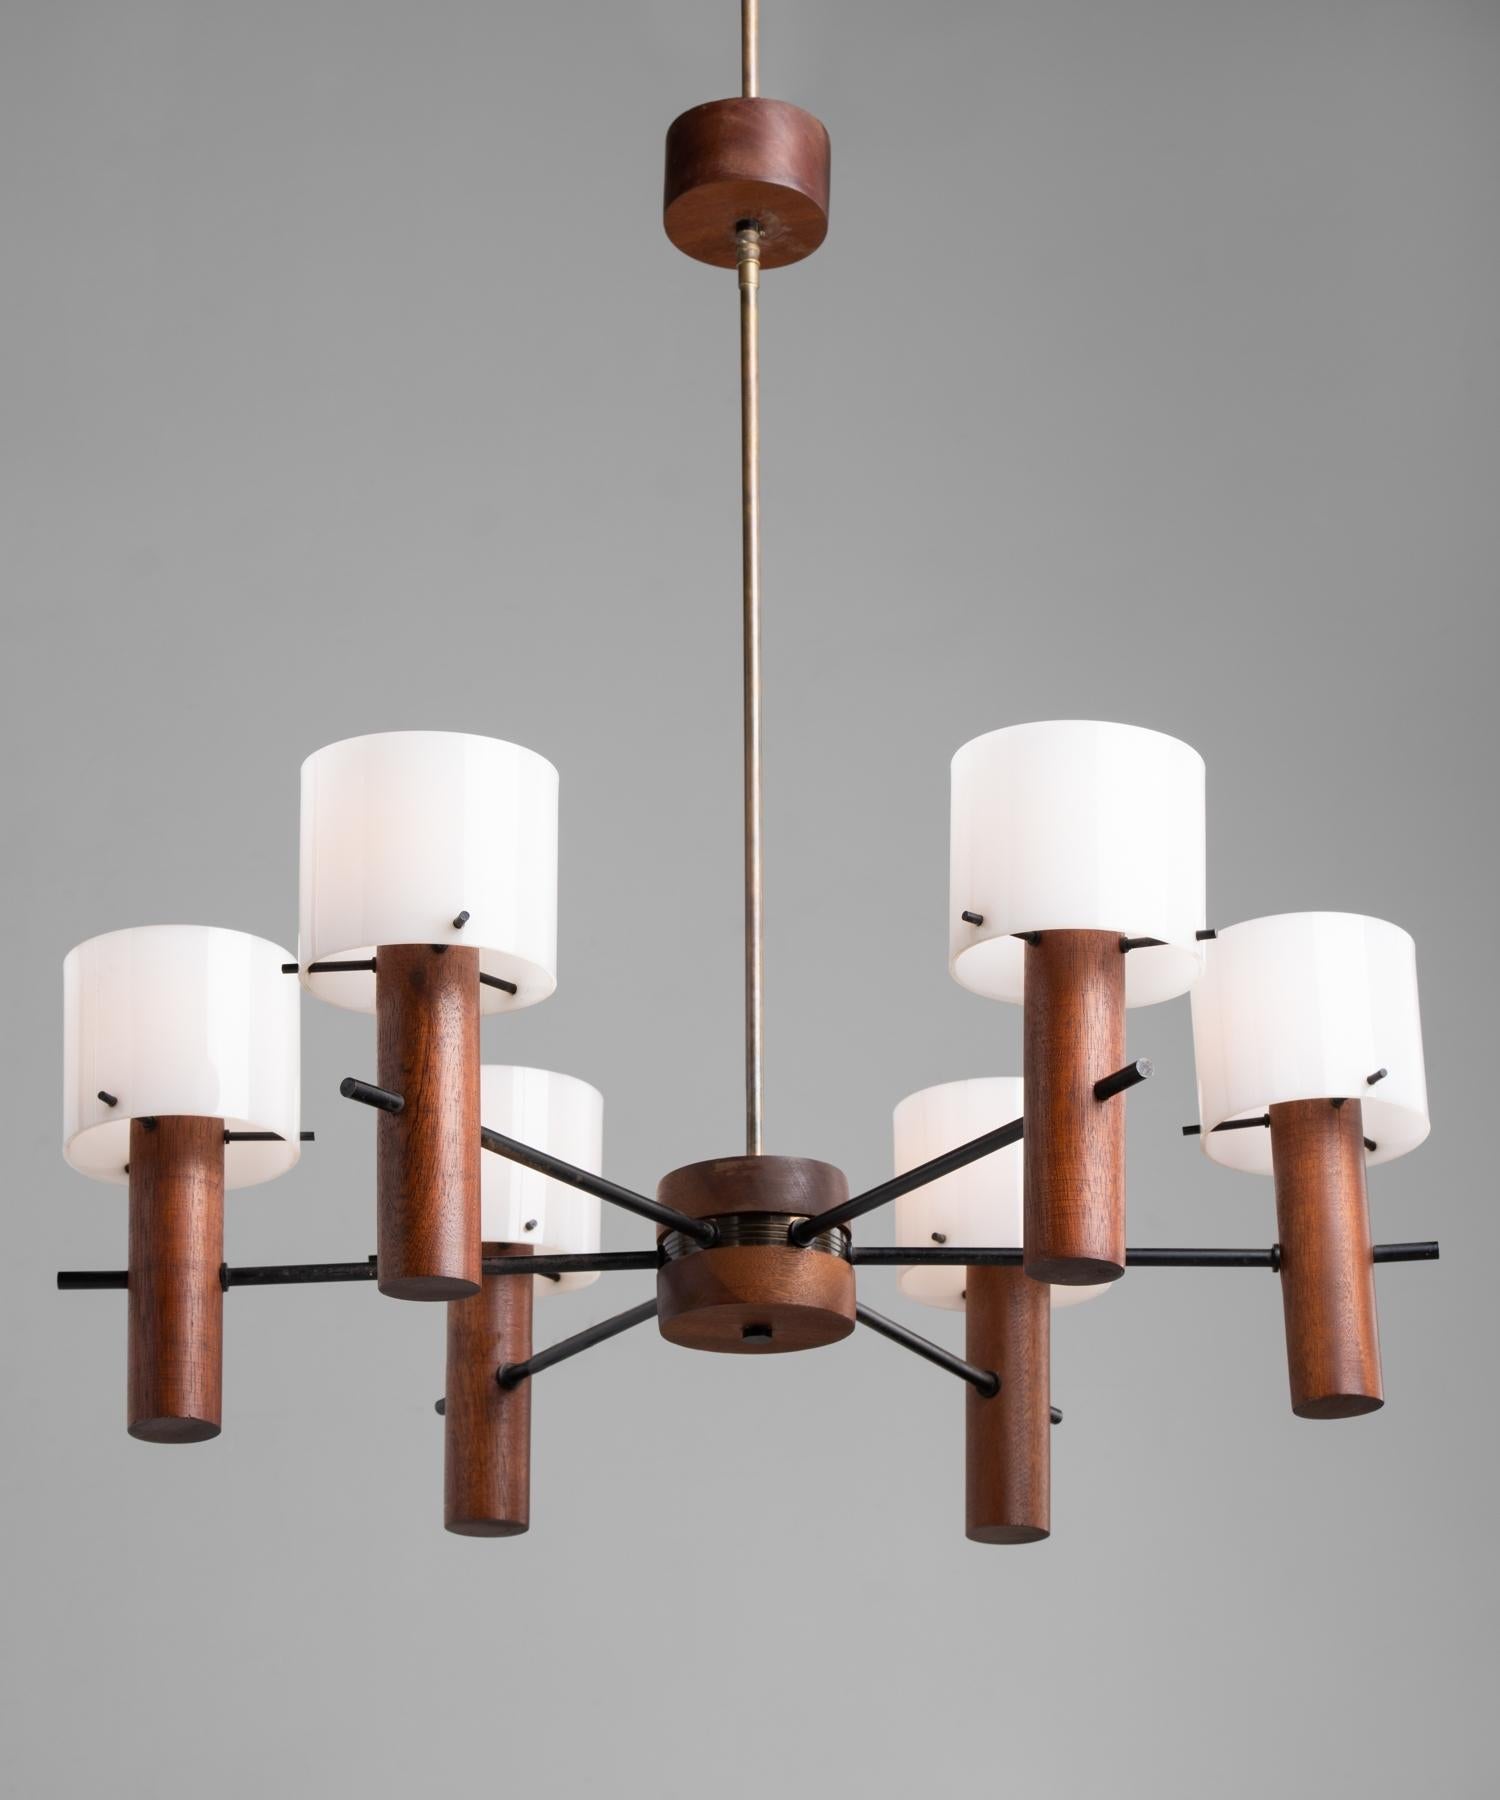 Teak & Perspex chandelier, Italy, circa 1960.

Elegant form with teak and metal construction and (6) cylindrical perspex shades.